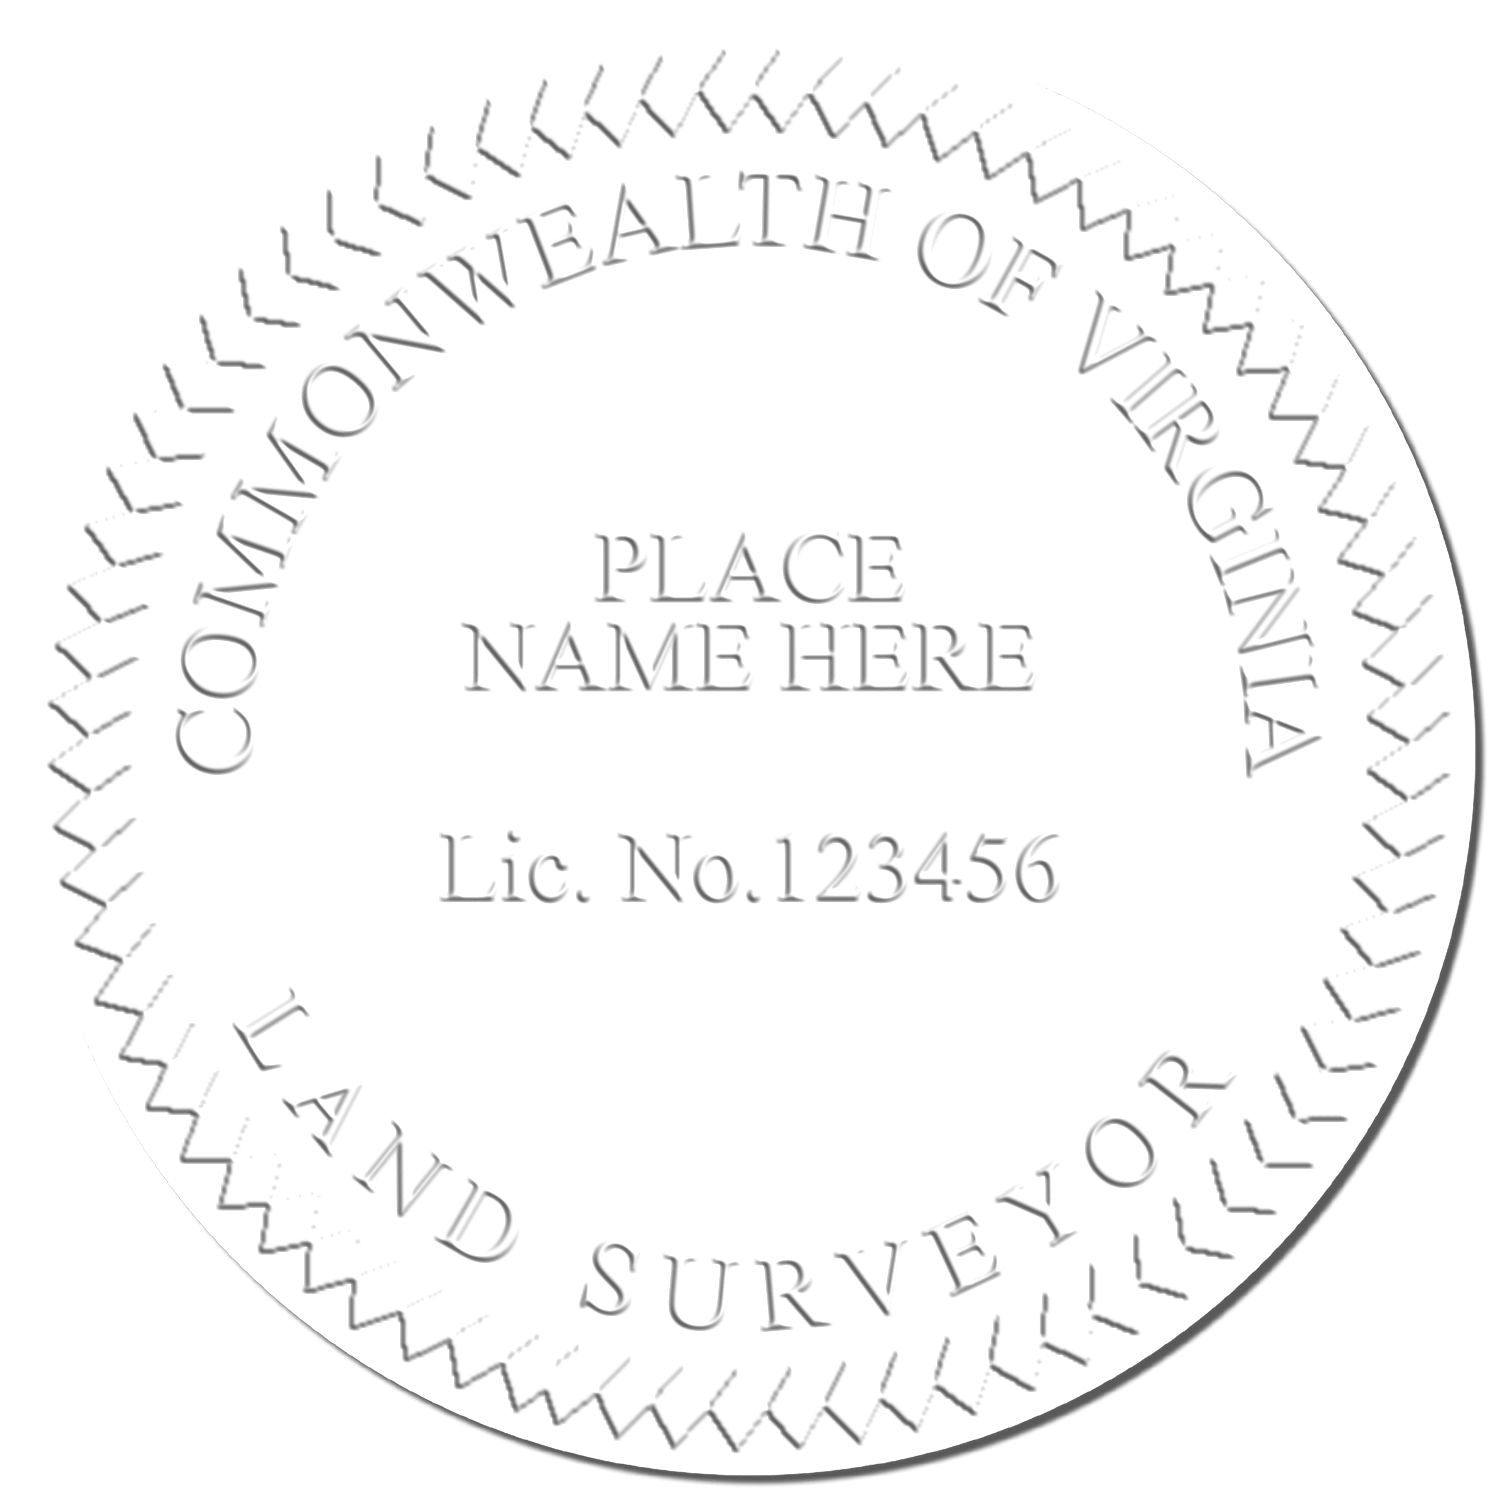 This paper is stamped with a sample imprint of the Long Reach Virginia Land Surveyor Seal, signifying its quality and reliability.